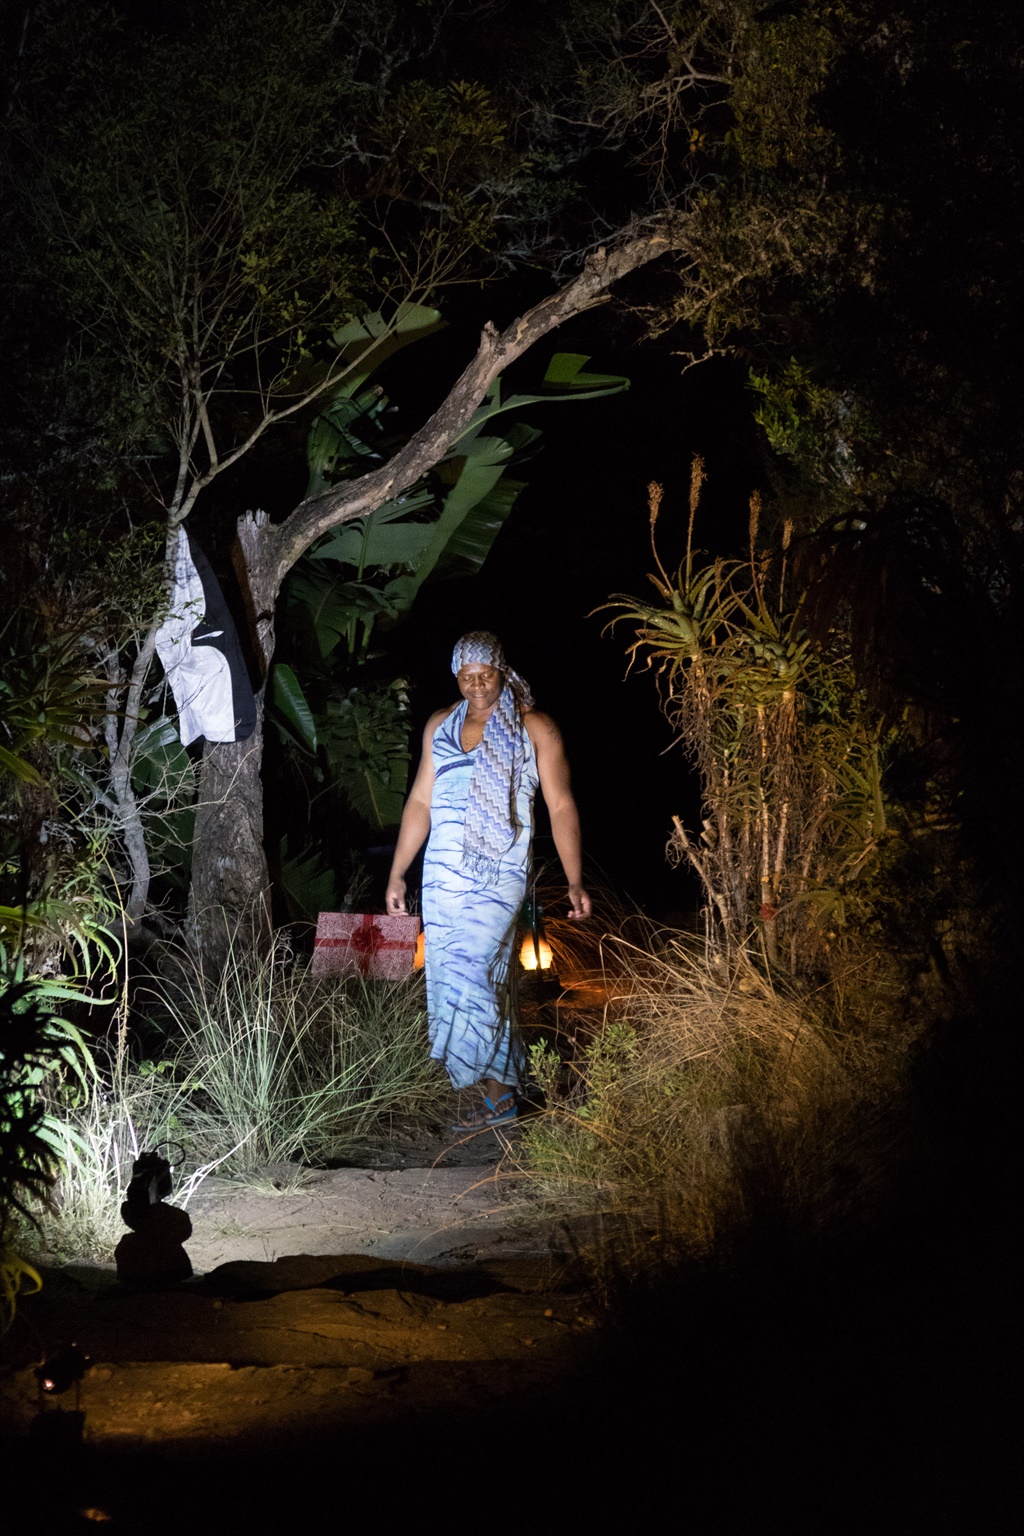 Paya performs at the theatre production AfriQueer in the Botanical Gardens on 30 June at the 2016 National Arts Festival. AfriQueer is an evocative site-specific journey through multiple solo performances from across Africa. Picture: Ivan Blazic/CuePix